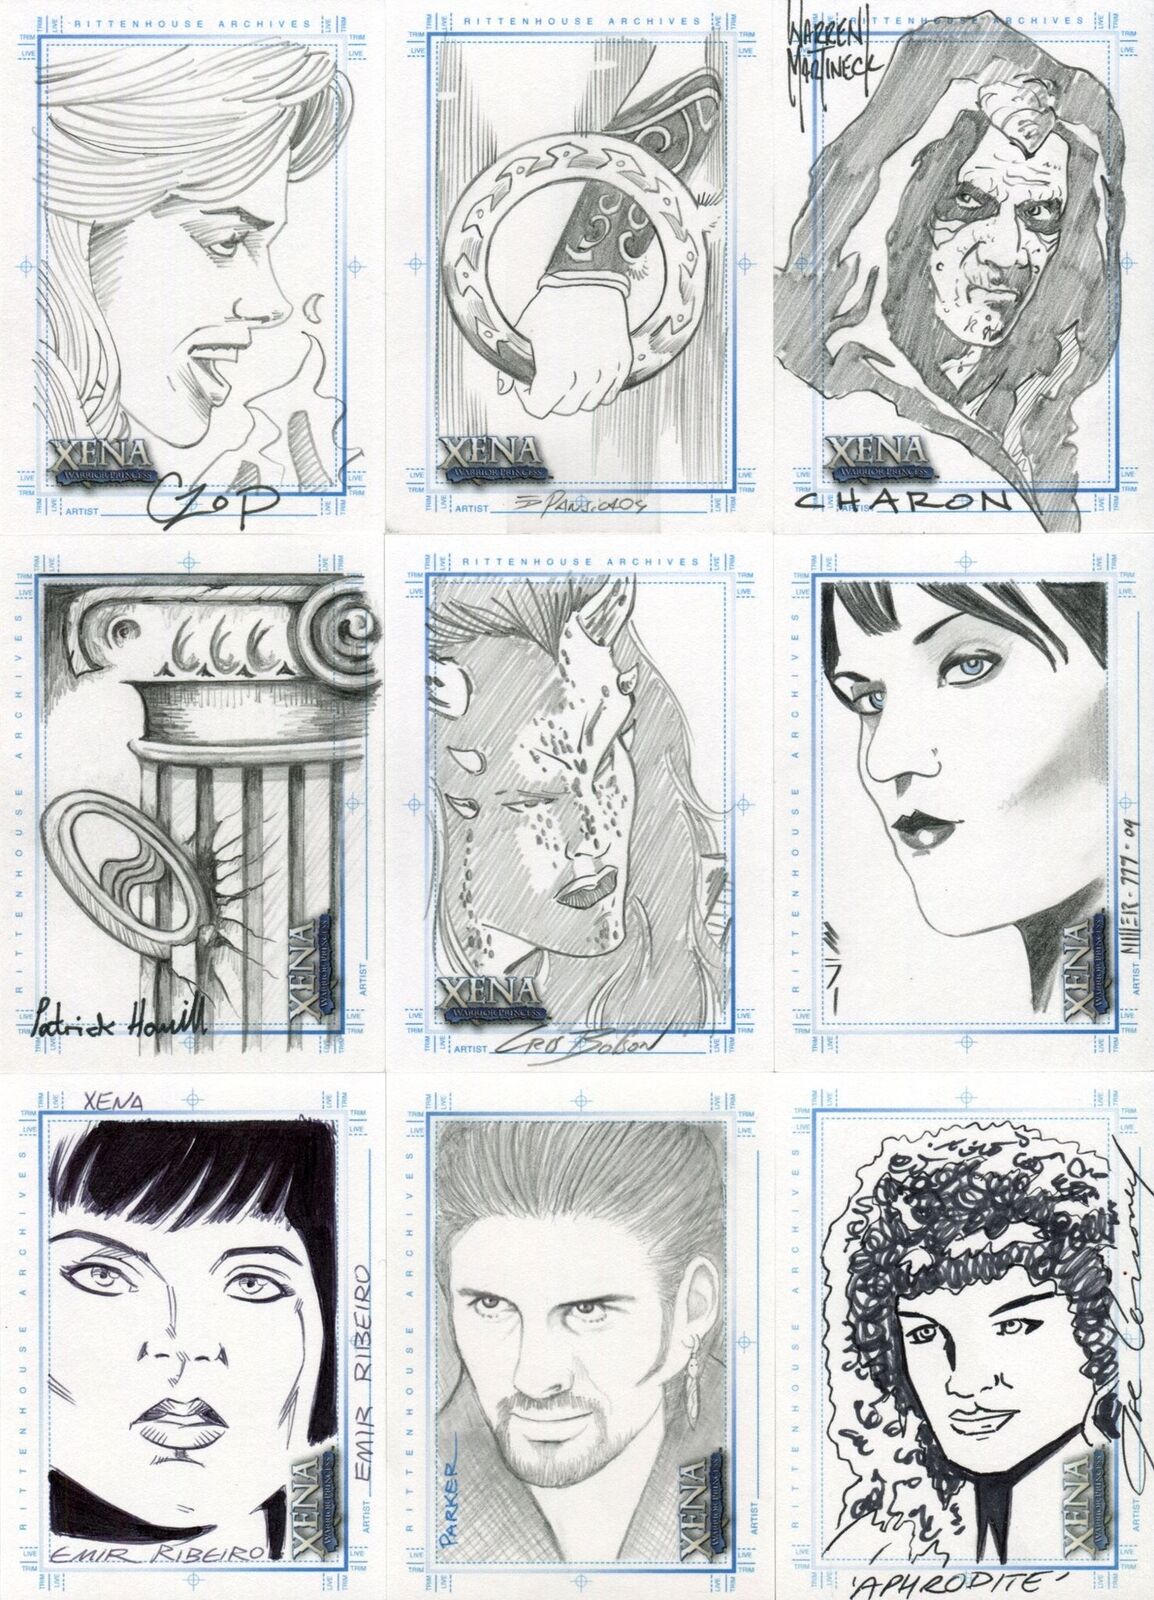 Xena Art & Images Complete Sketch Card Set 11 Different Cards